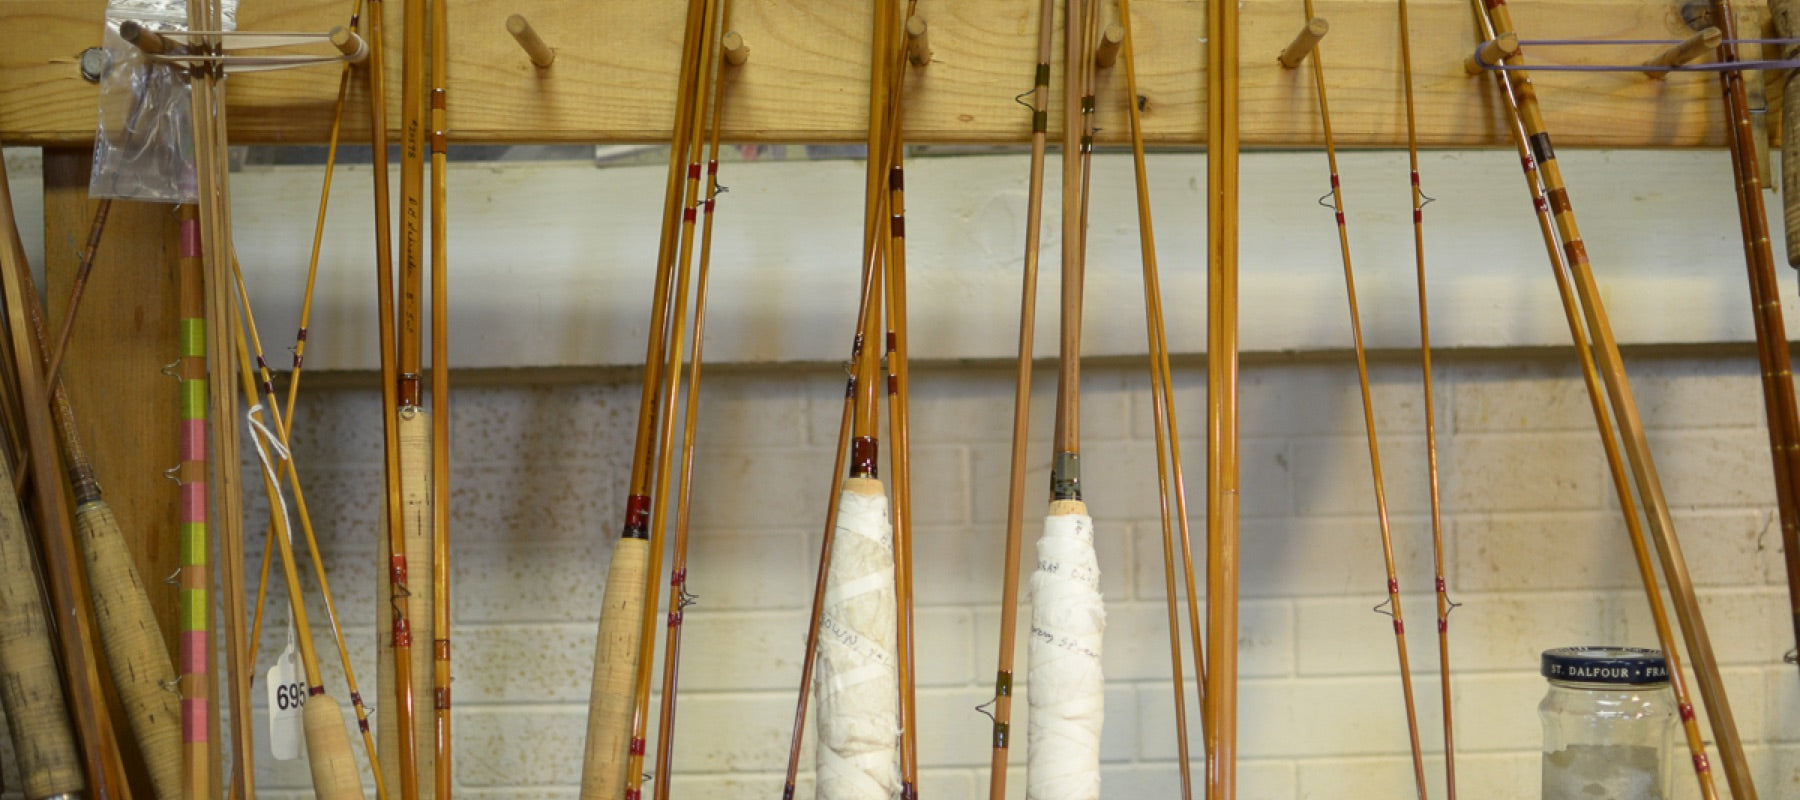 Bamboo Fly Rods: The Complete Beginners Guide - Spinoza Rod Company